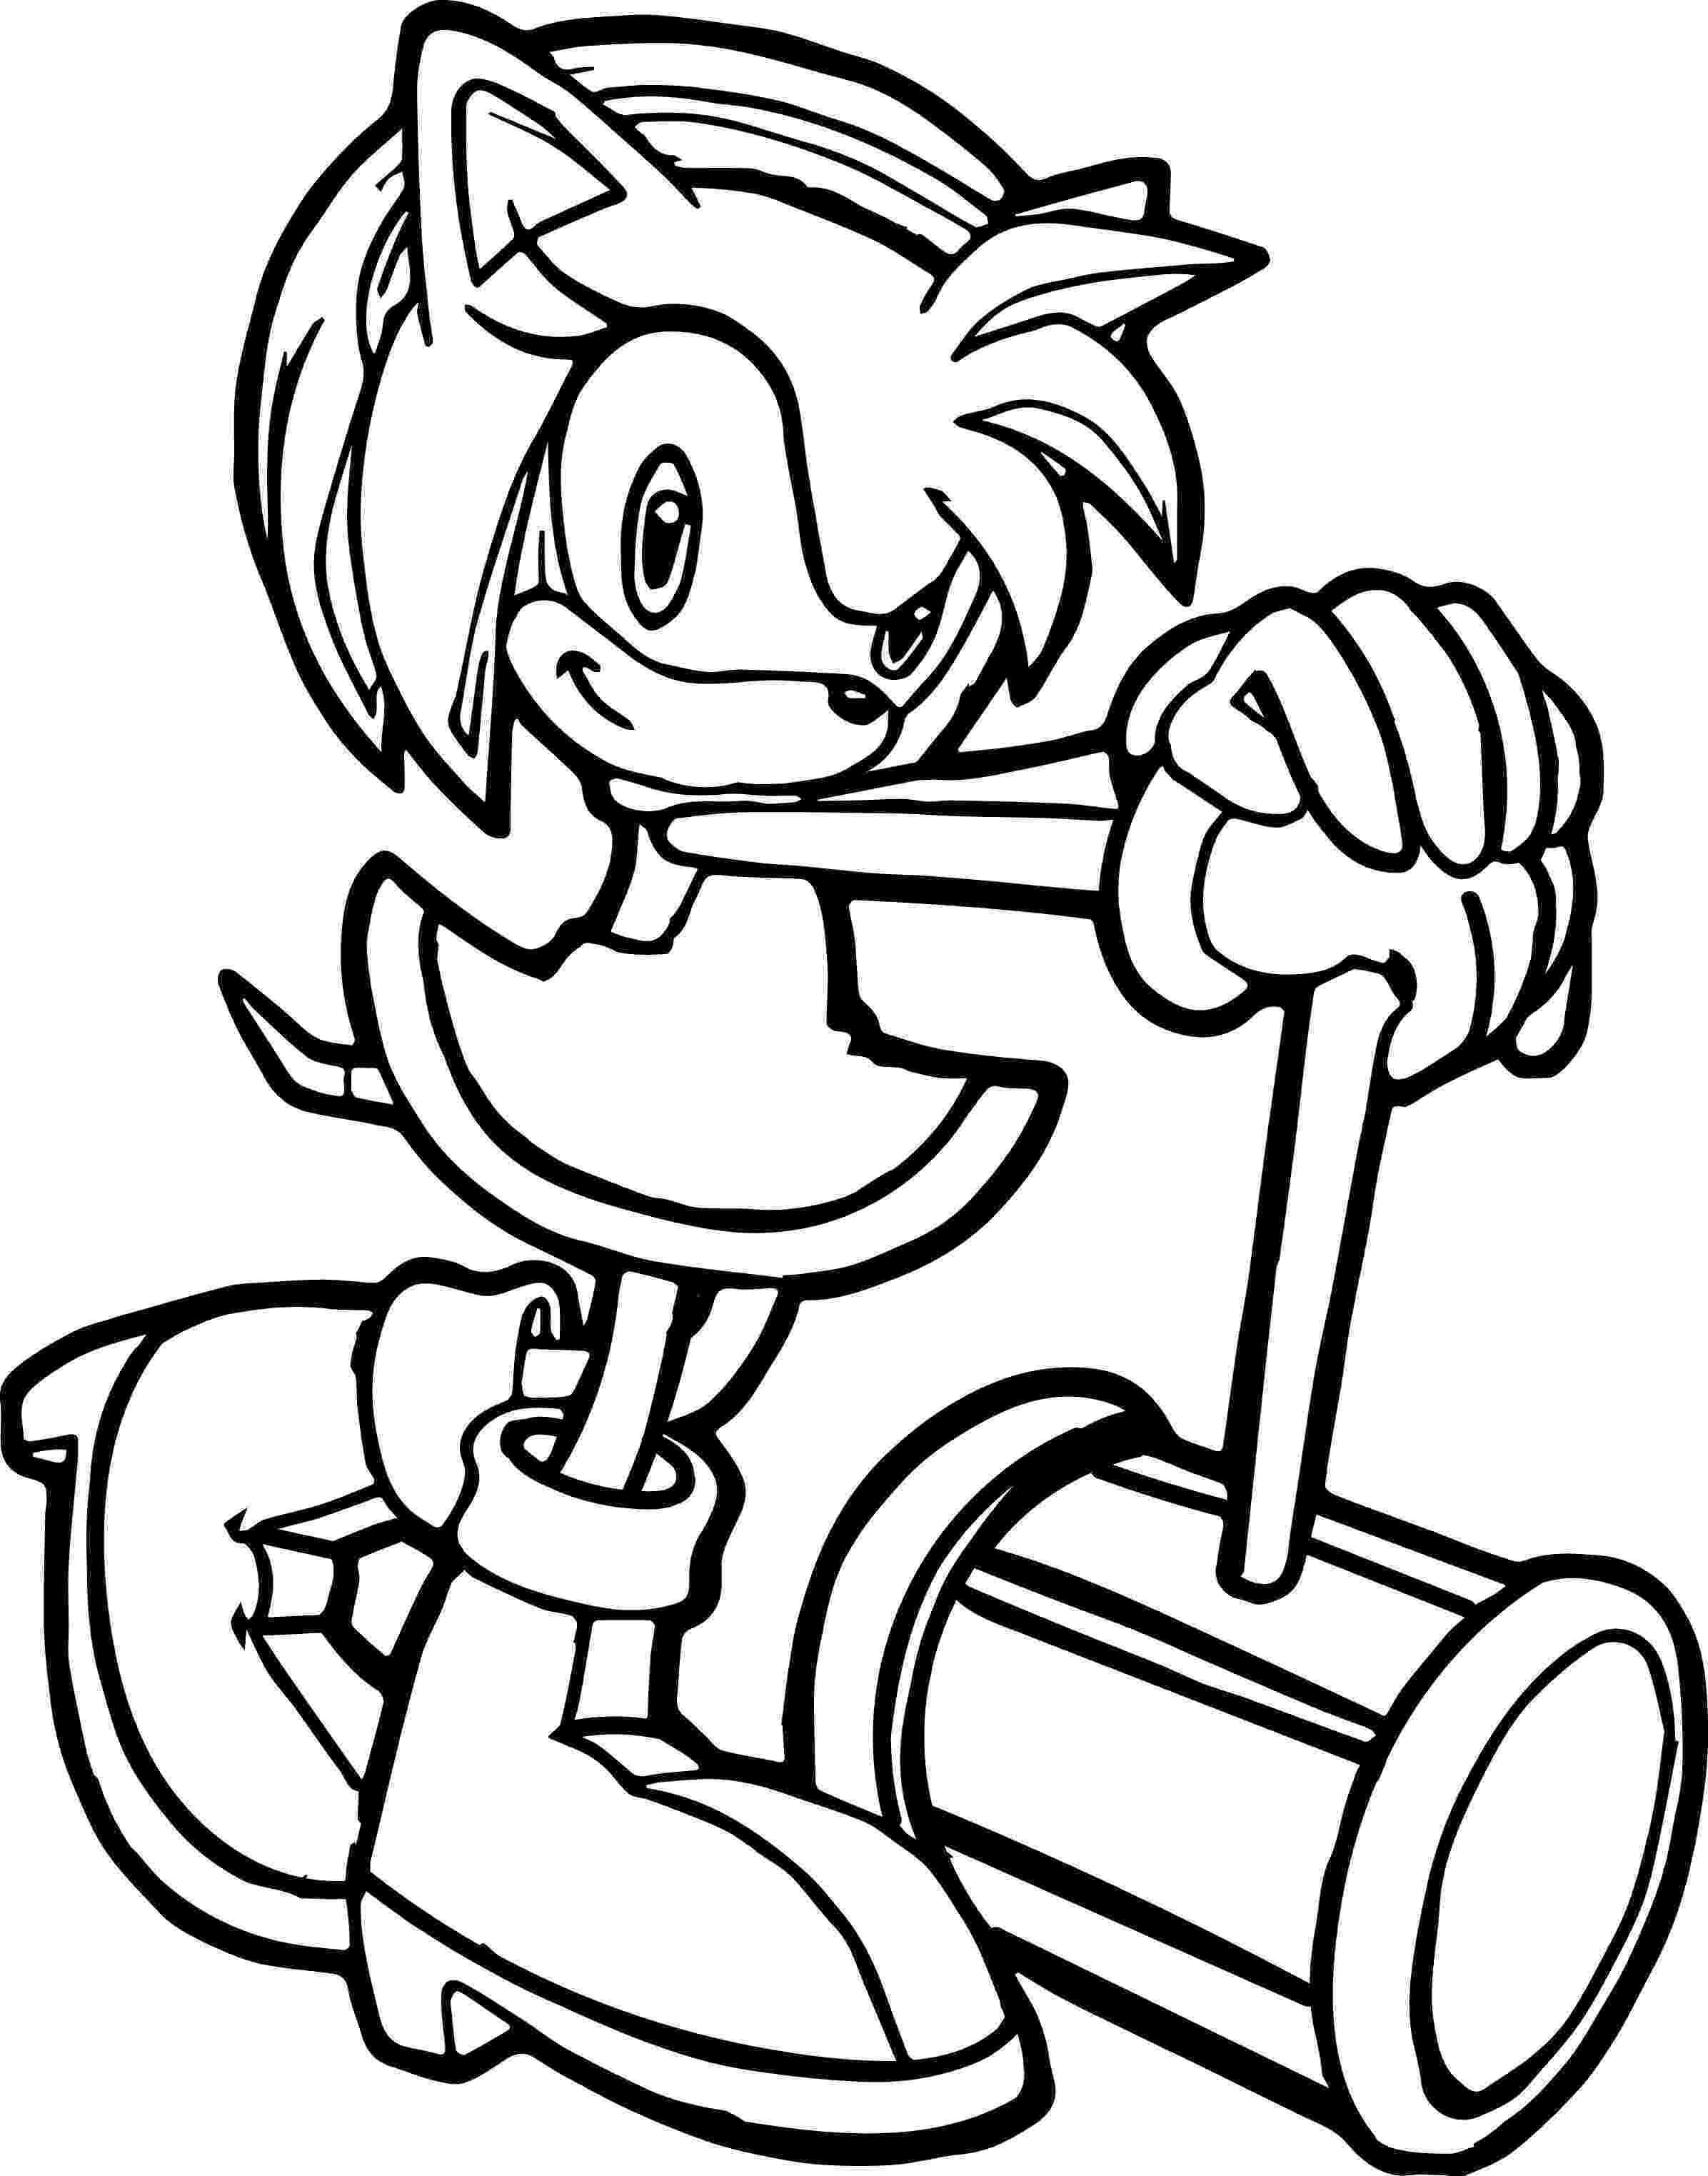 sonic amy coloring pages cute amy rose coloring page wecoloringpagecom pages coloring sonic amy 